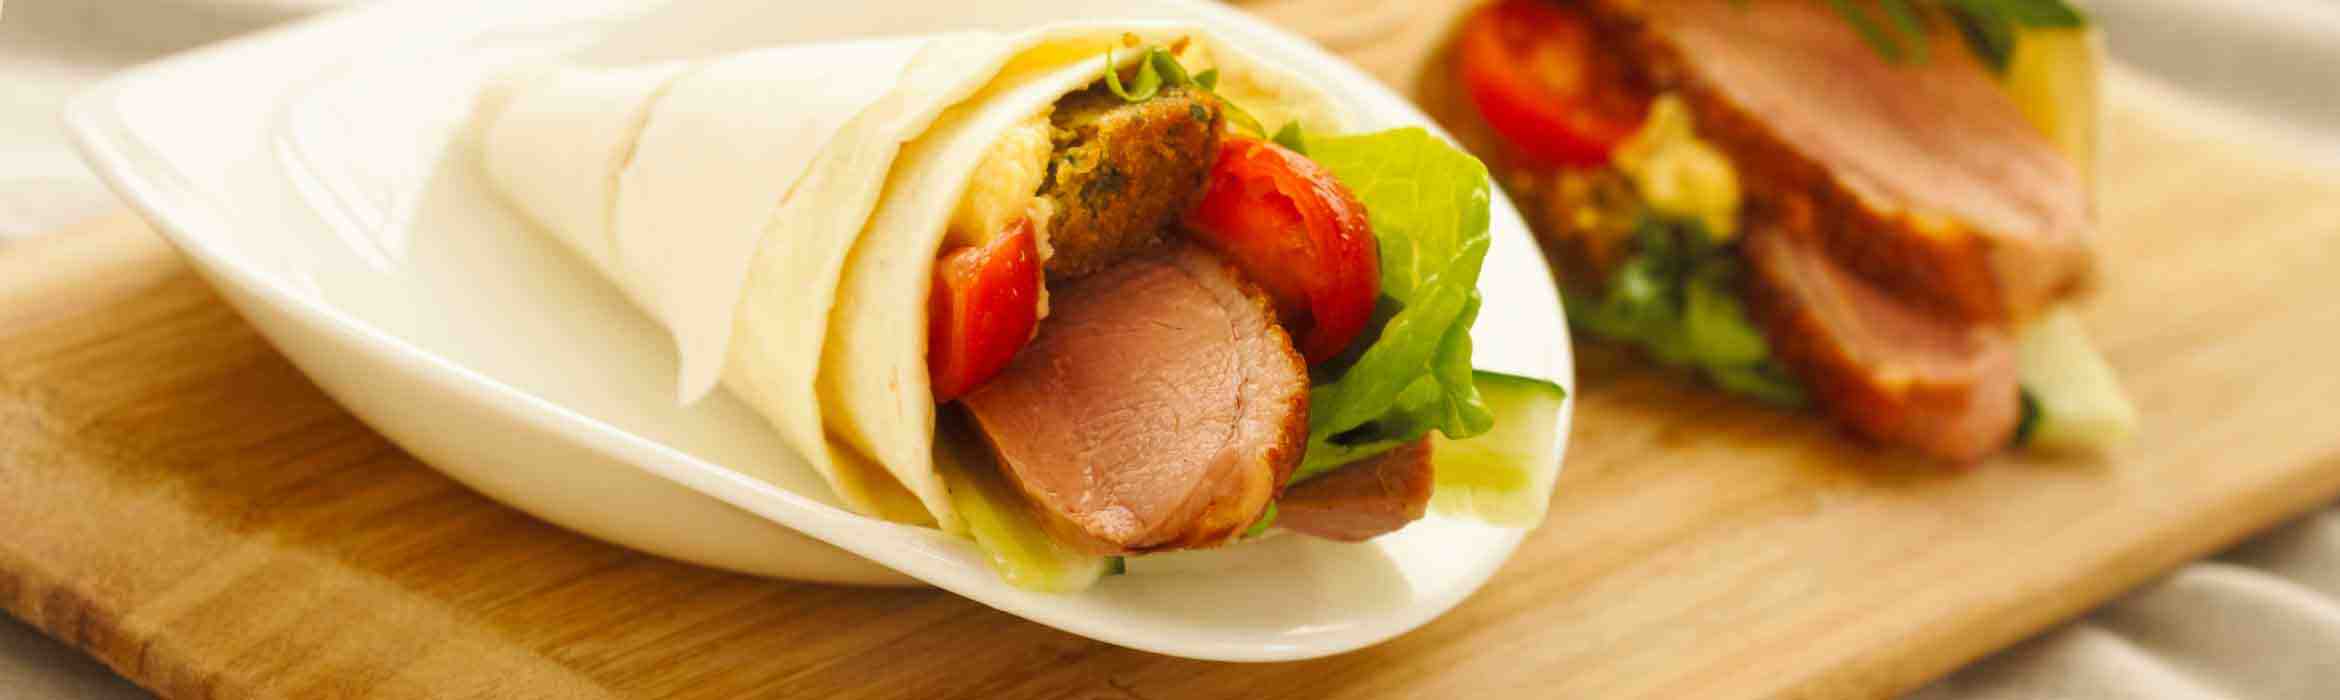 Smoked Duck and Falafel Wraps Recipe